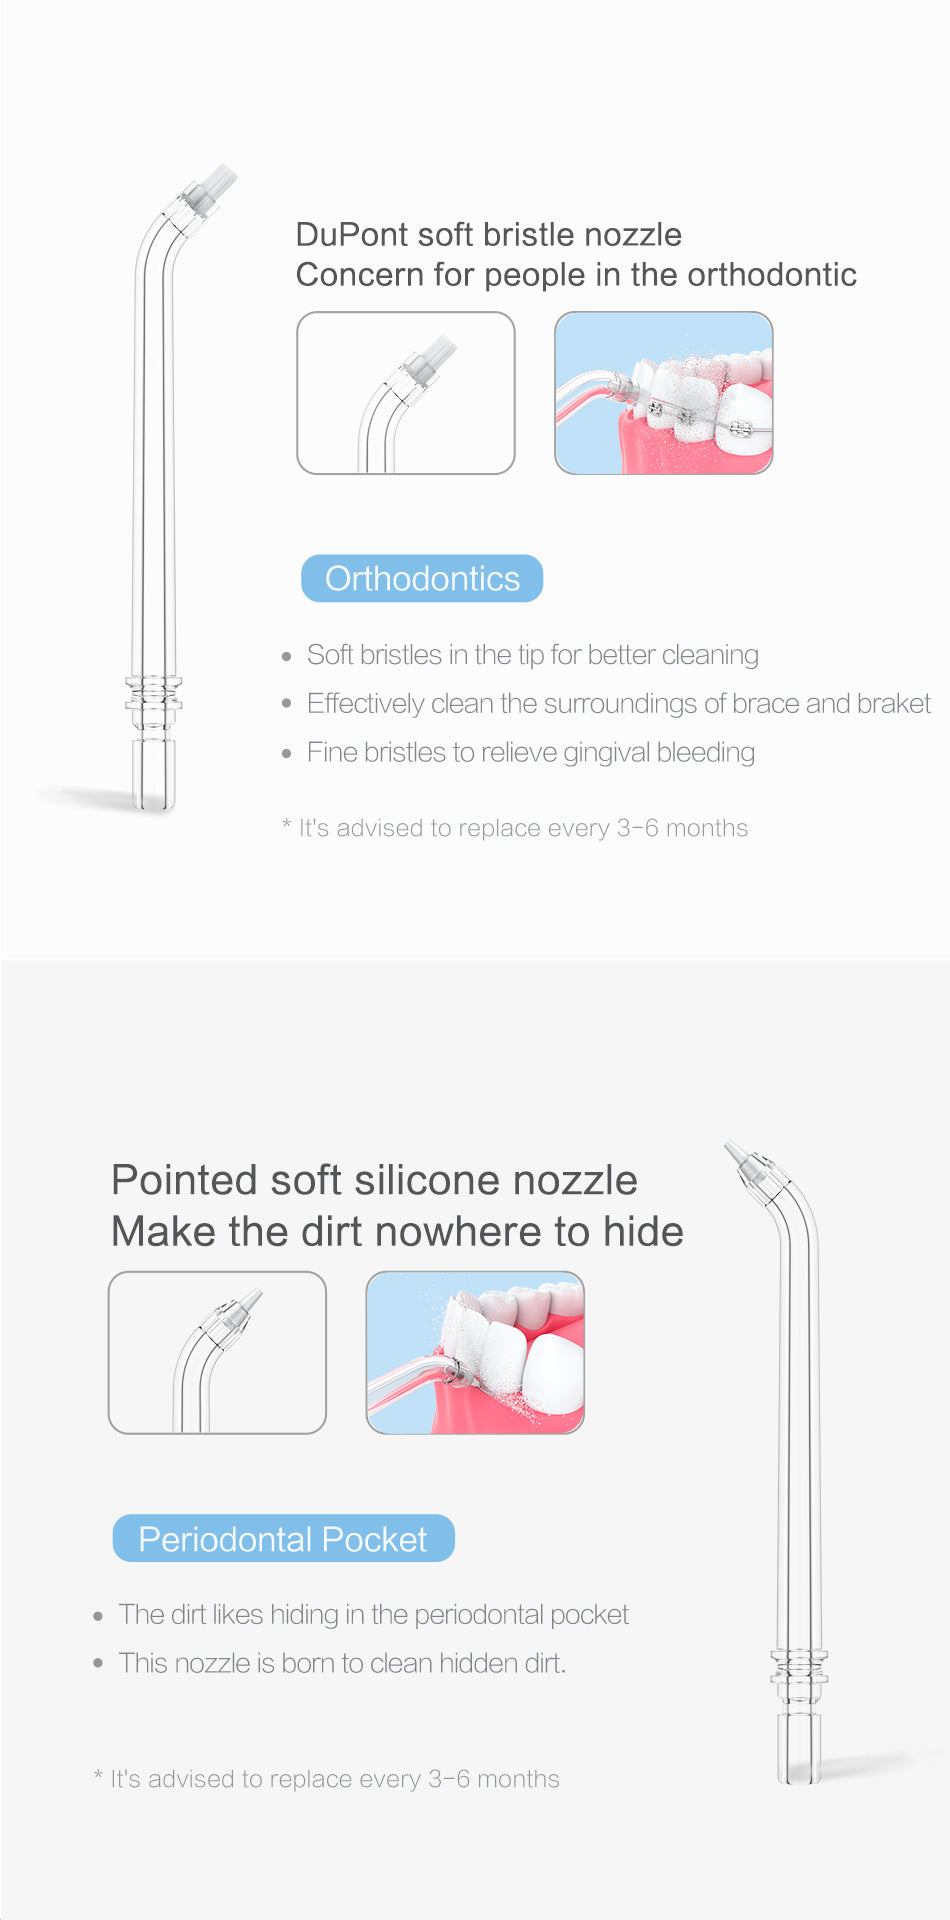 DR.BEI GF3/F3 Portable Water Flosser Nozzle, 2 Pieces  Xiaomi Youpin DR.BEI Oral Irrigator Cleaning Nozzles 2pcs for DR.BEI GF3 Dental Teeth Cleaning Machine Standard Tongue Periodontal Irrigator Nozzles